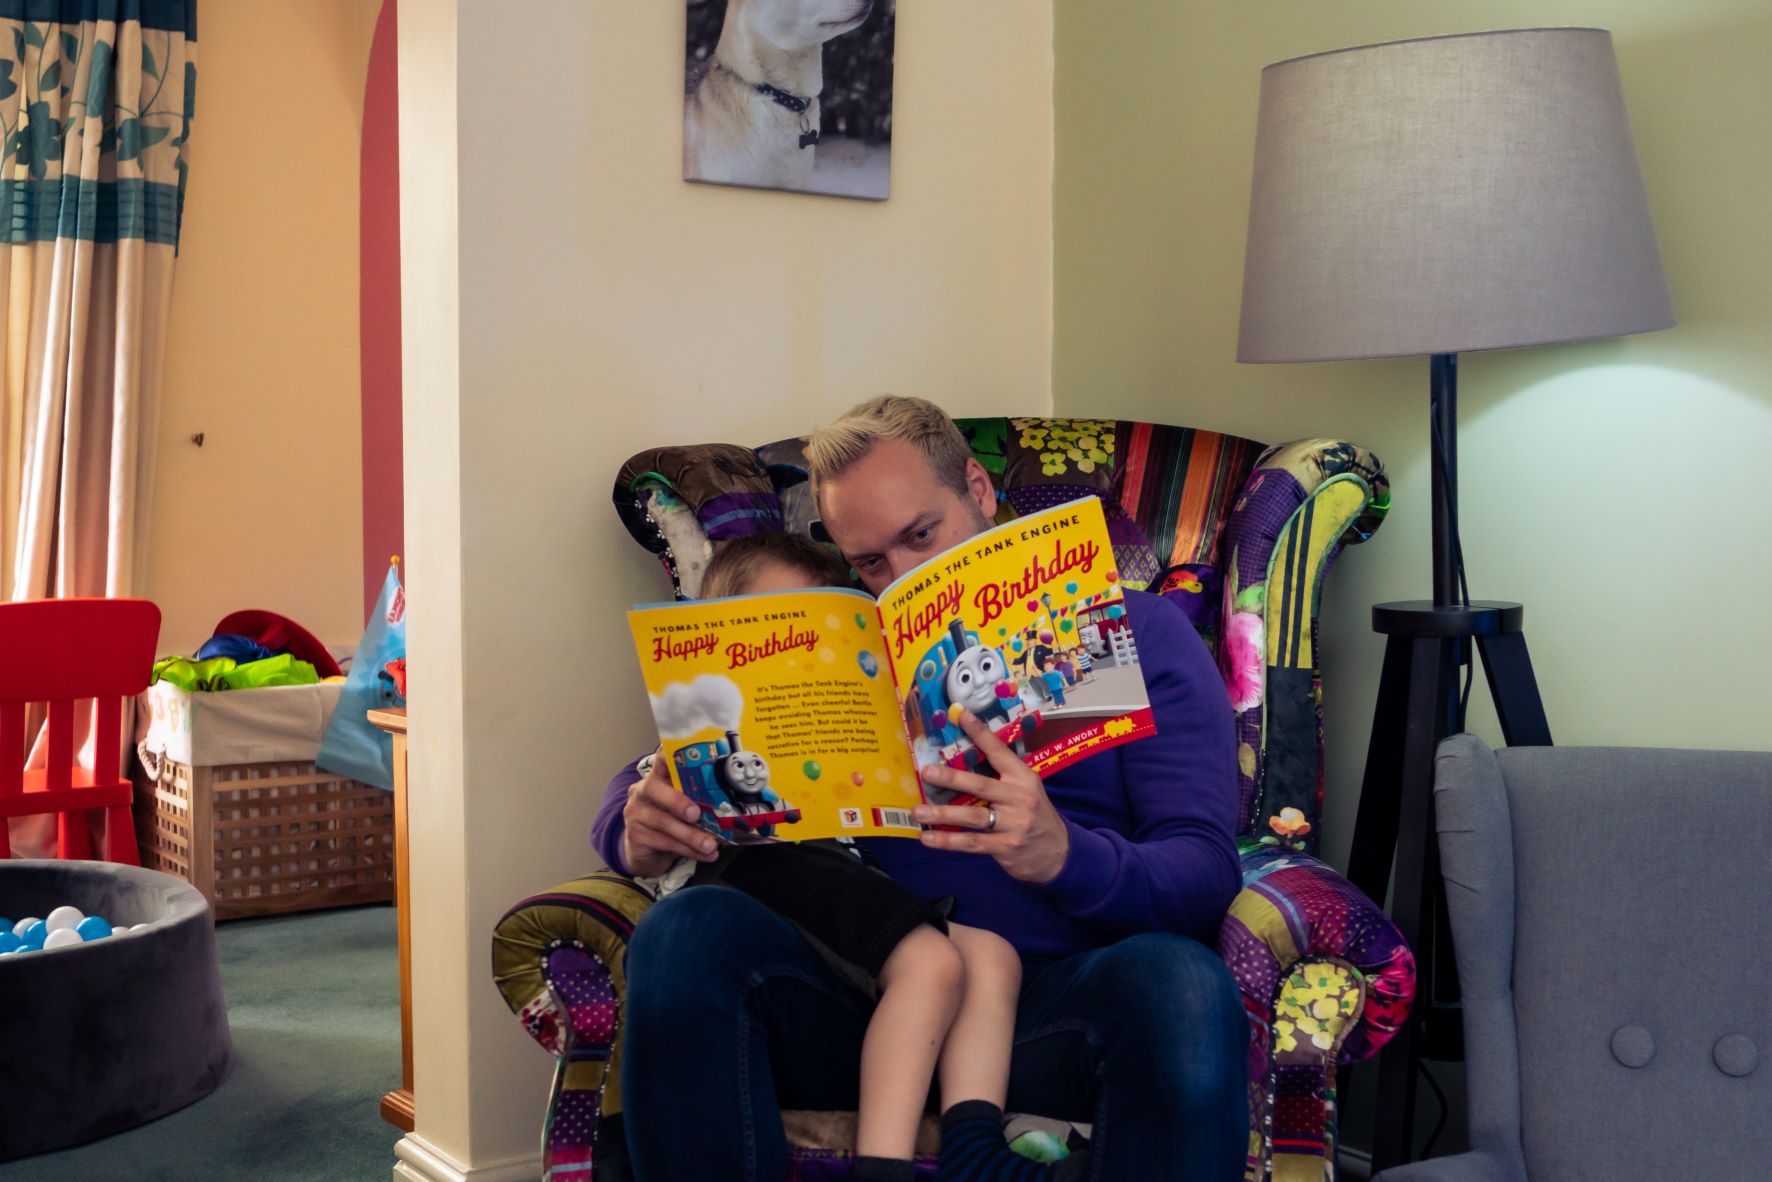 Dad Andy reading a book with his son